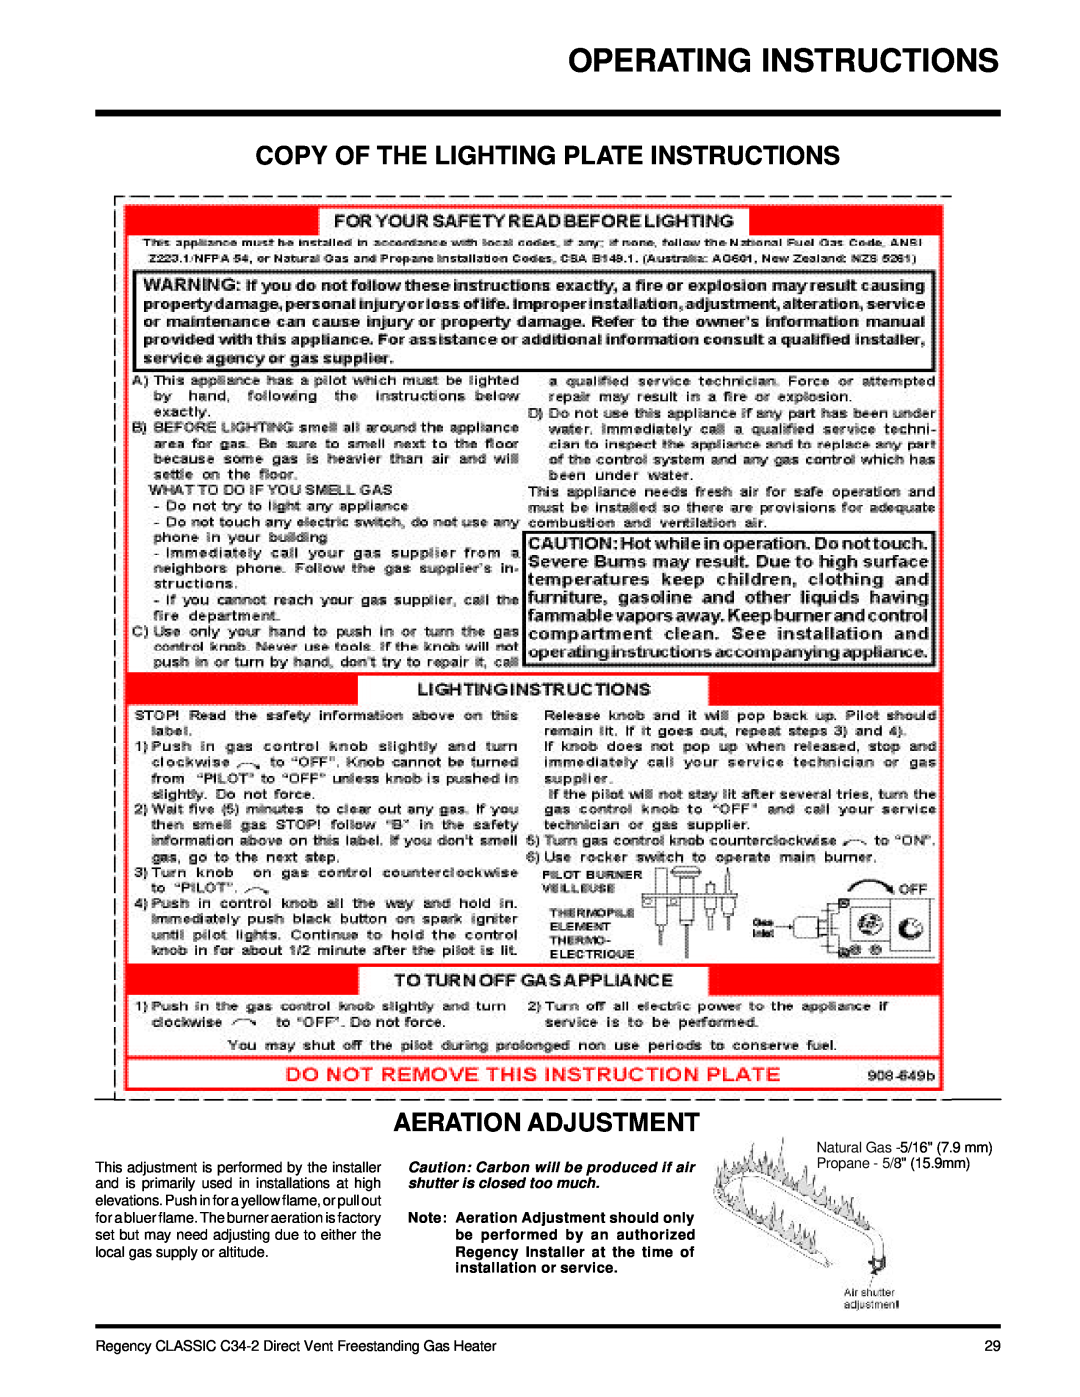 Regency C34-LP2, C34-NG2 Operating Instructions, Copy Of The Lighting Plate Instructions, Aeration Adjustment 